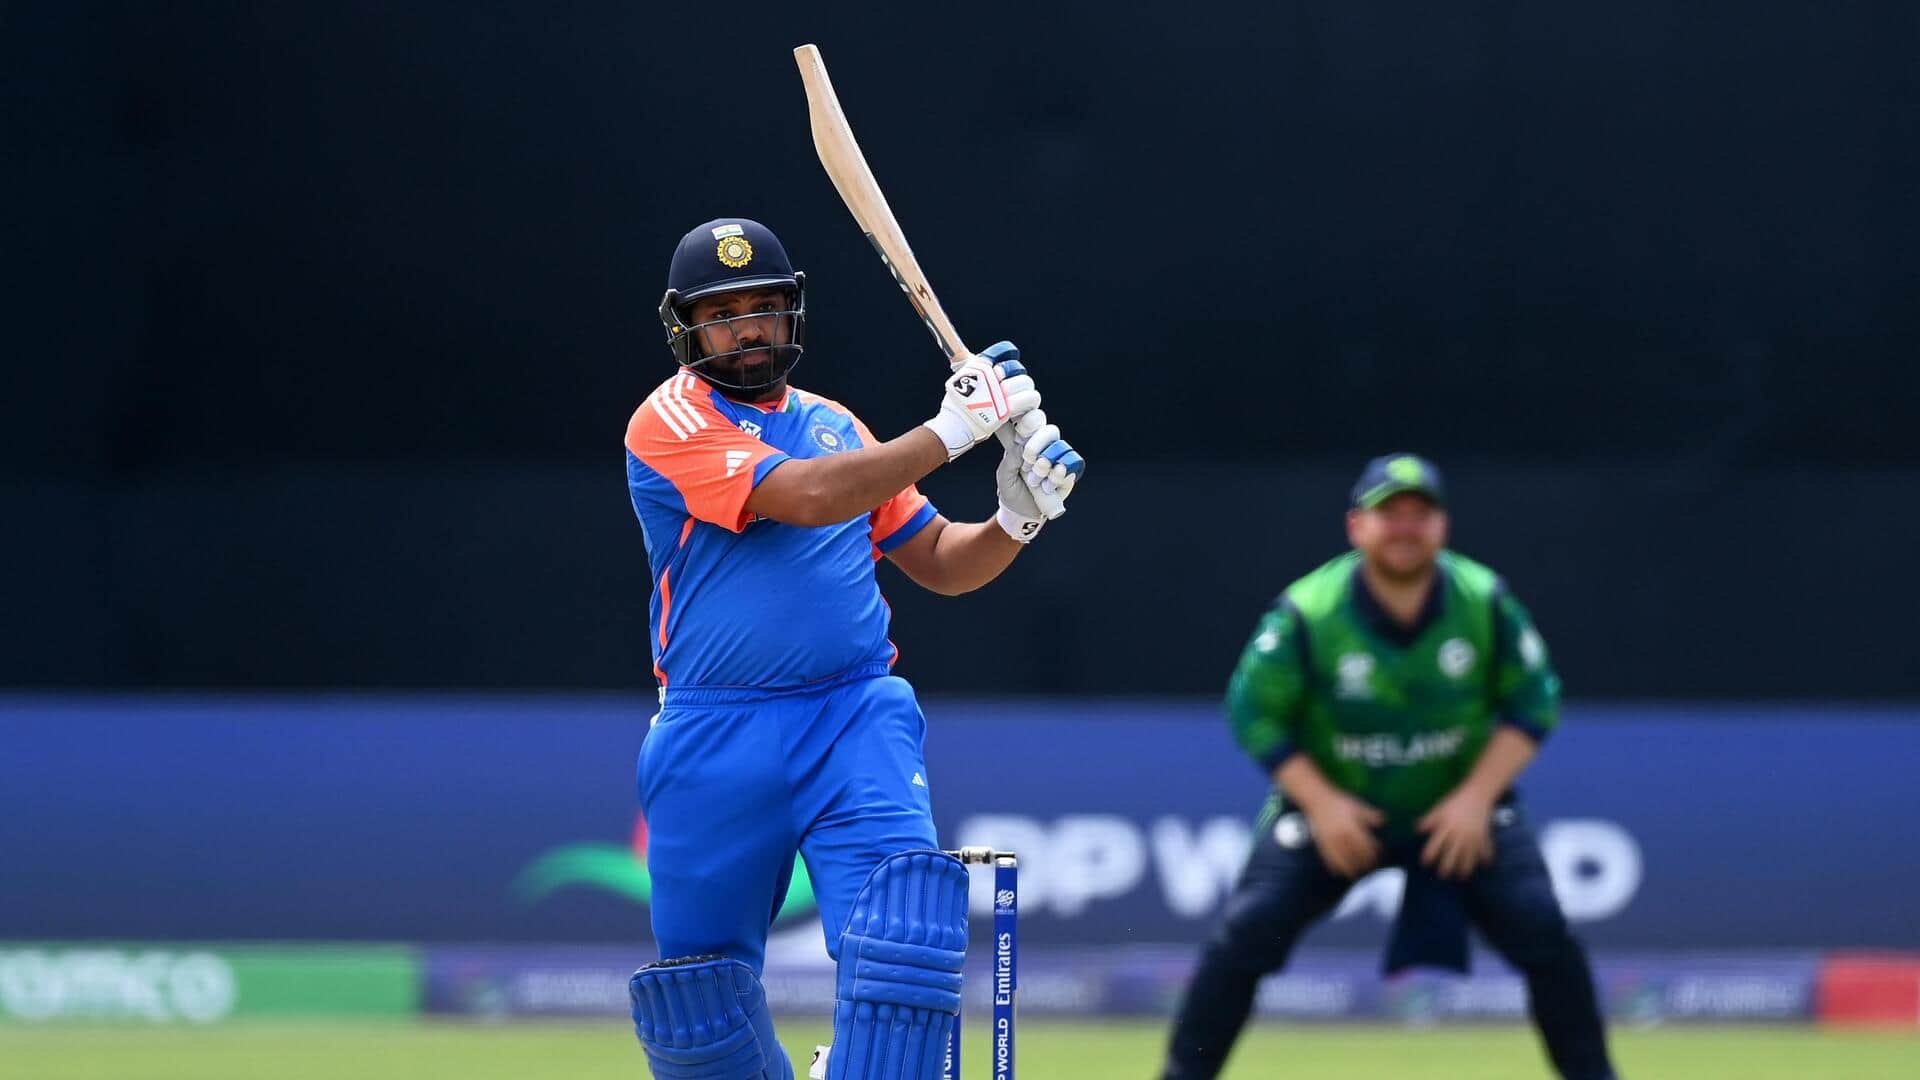 How has Rohit Sharma fared against Pakistan in T20Is?